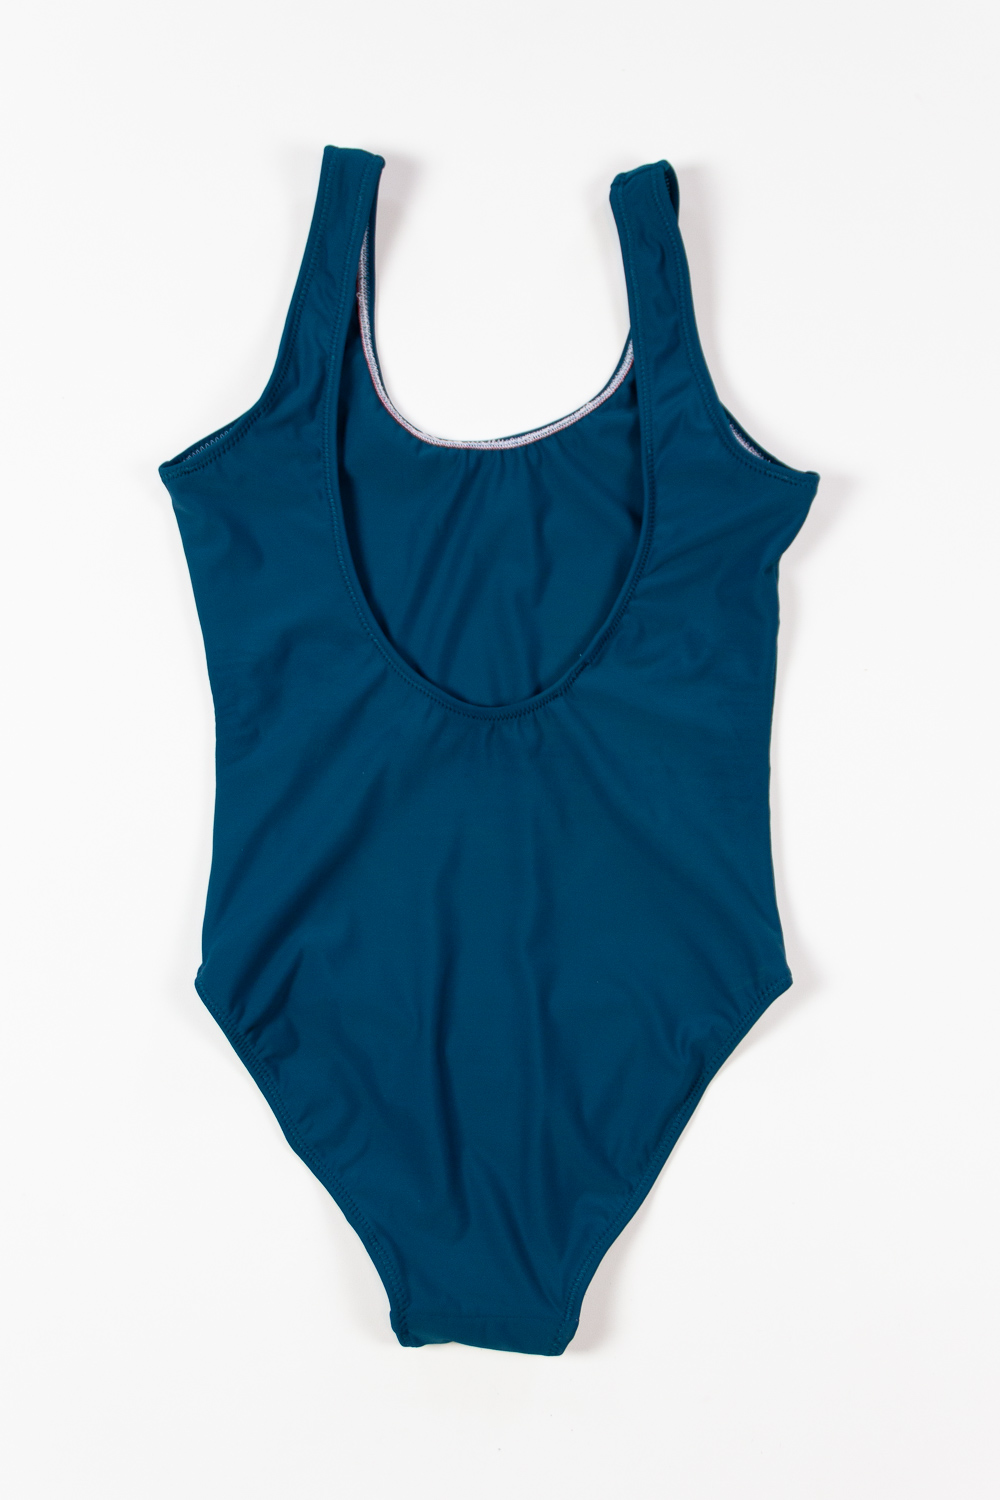 How to Make a Sewing Pattern from Your Favorite RTW Swimsuit — SARAH ...